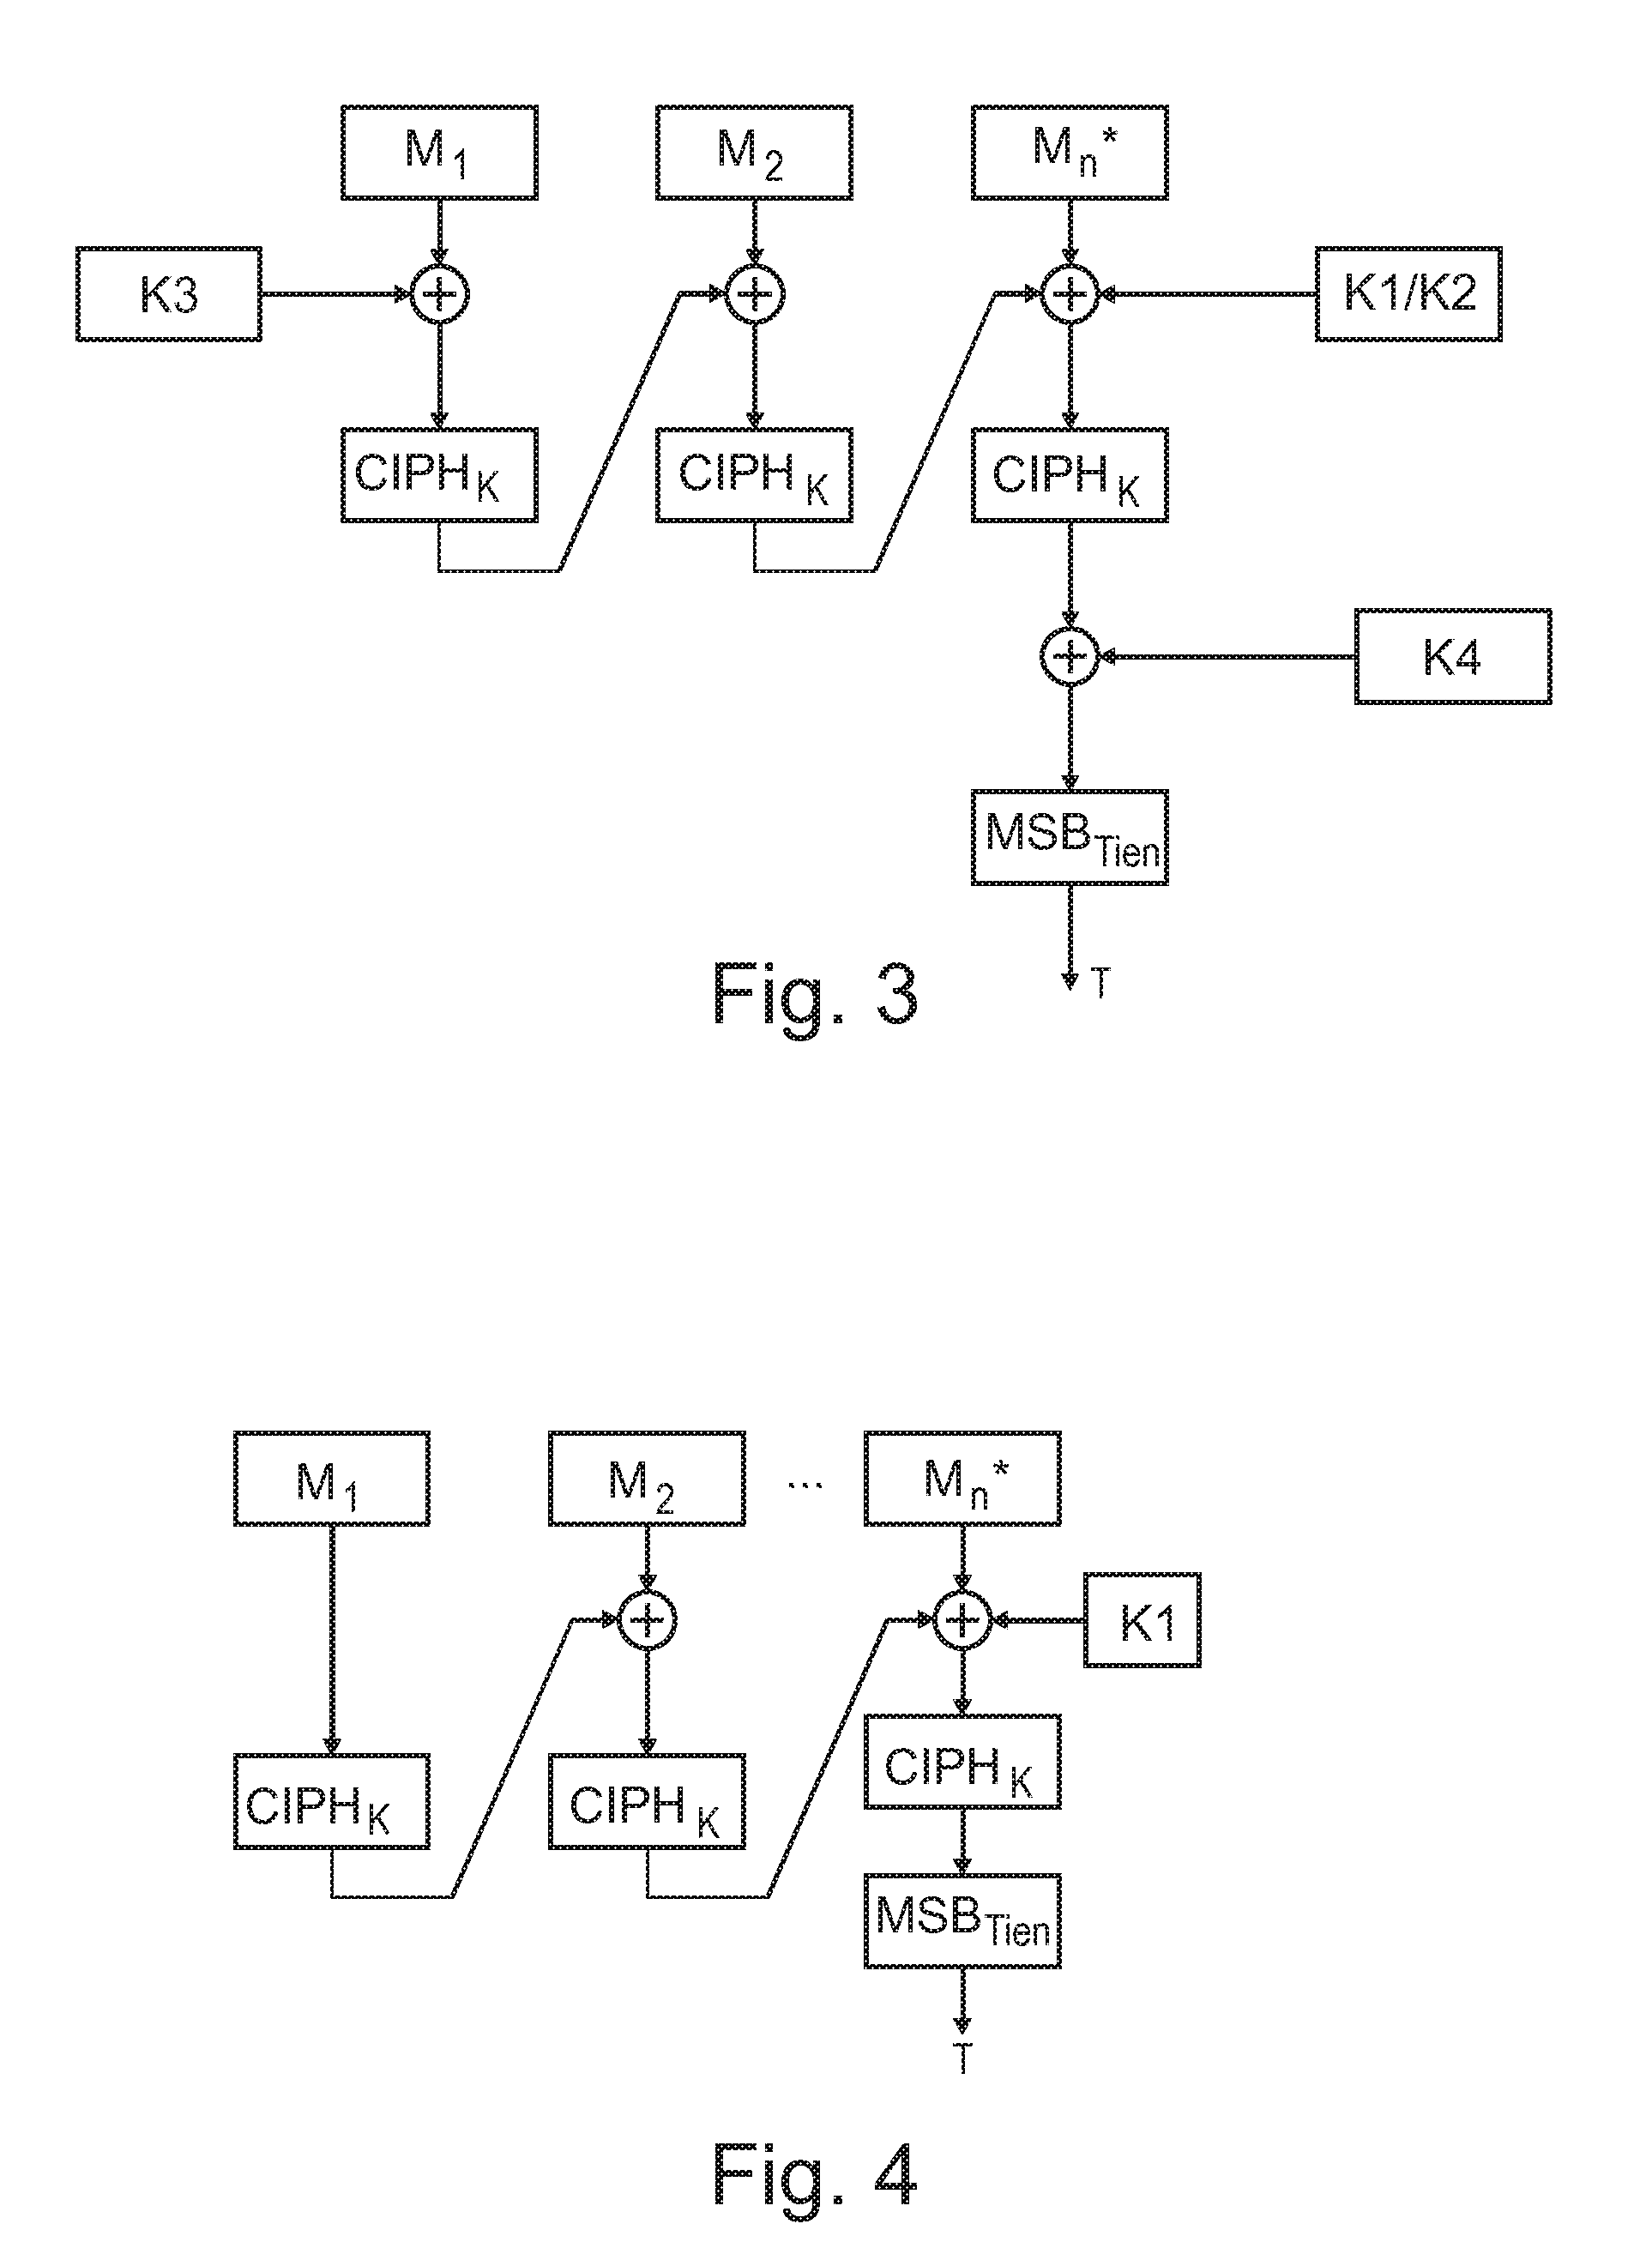 Device for generating a message authentication code for authenticating a message